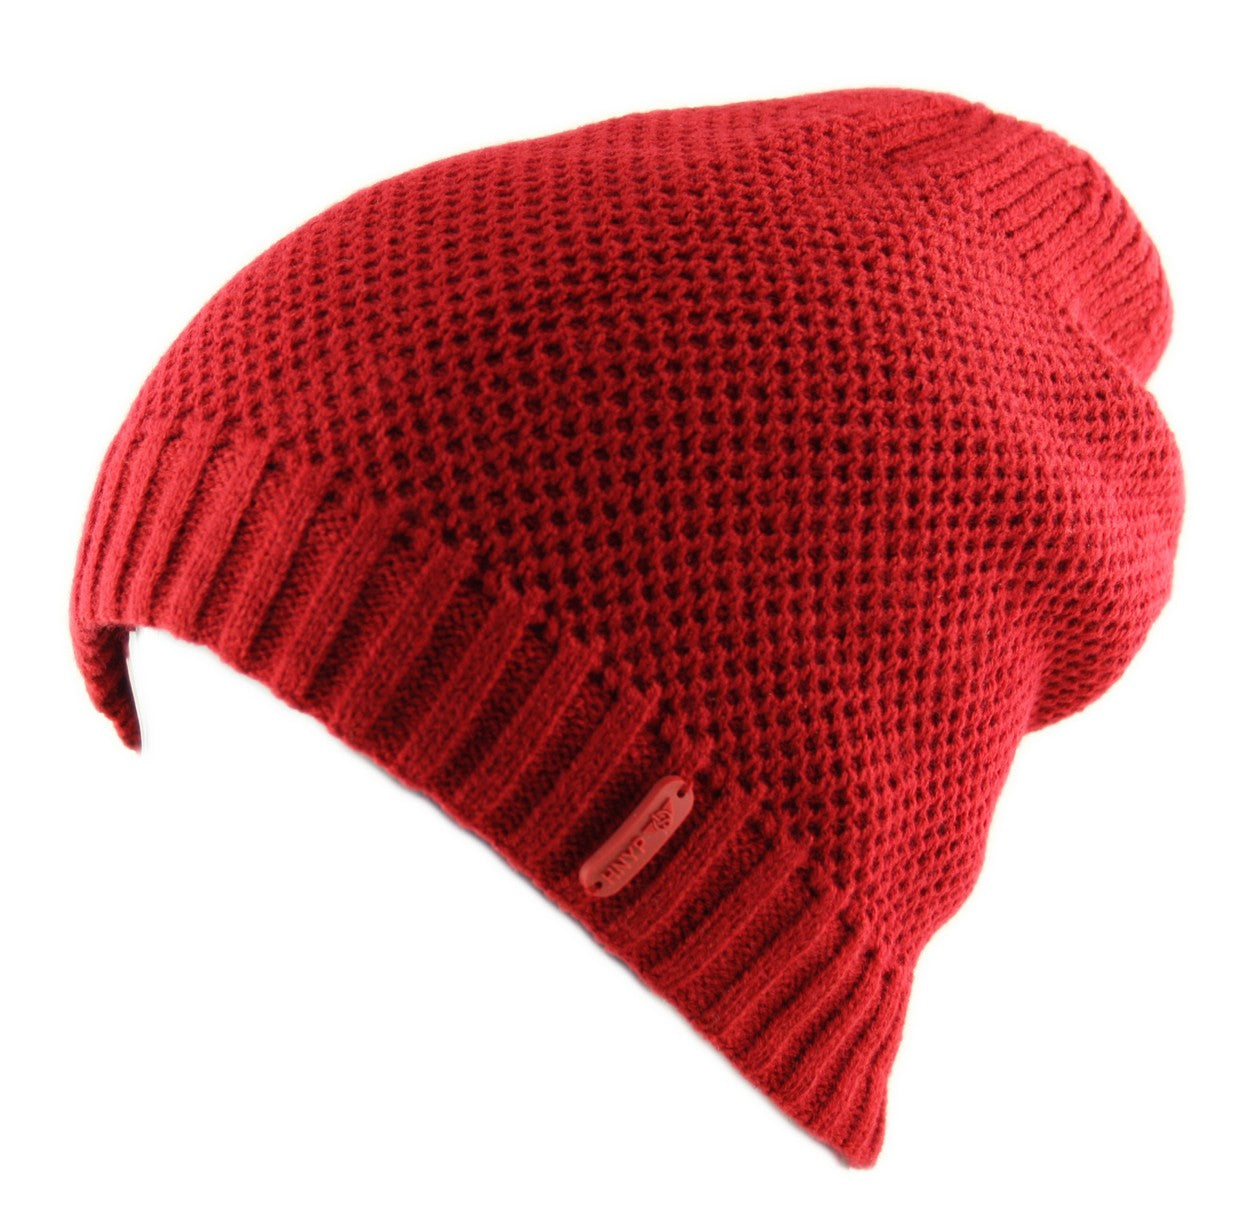 Unisex Waffle Knit Slouch Beanie Hat Wool in Red